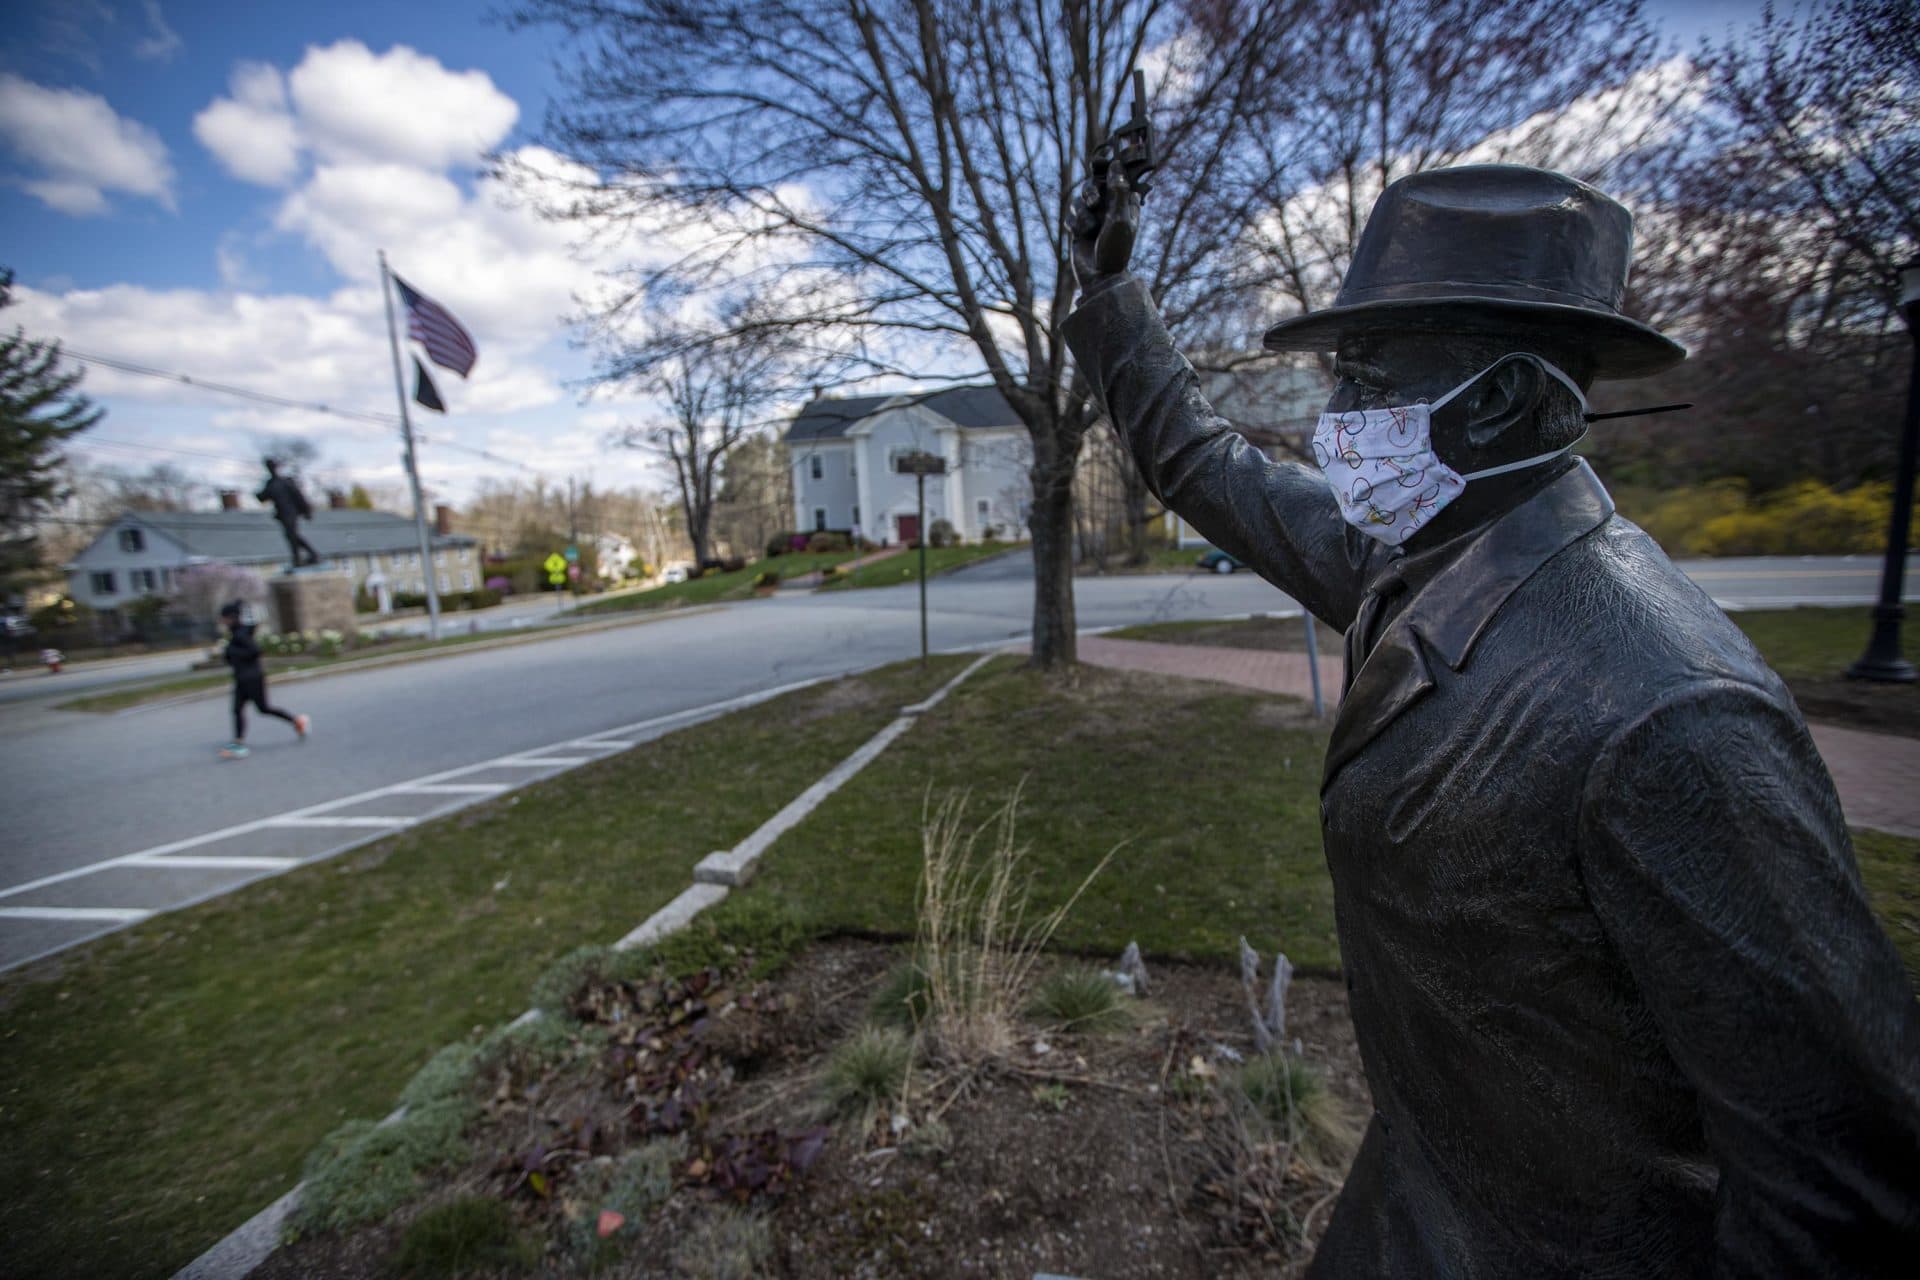 April 17: As she performs a virtual half marathon to keep up her training for September, Hopkinton resident Joy Donohue runs past “The Starter” statue in the Hopkinton Town Common, site of the start of the Boston Marathon. (Jesse Costa/WBUR)